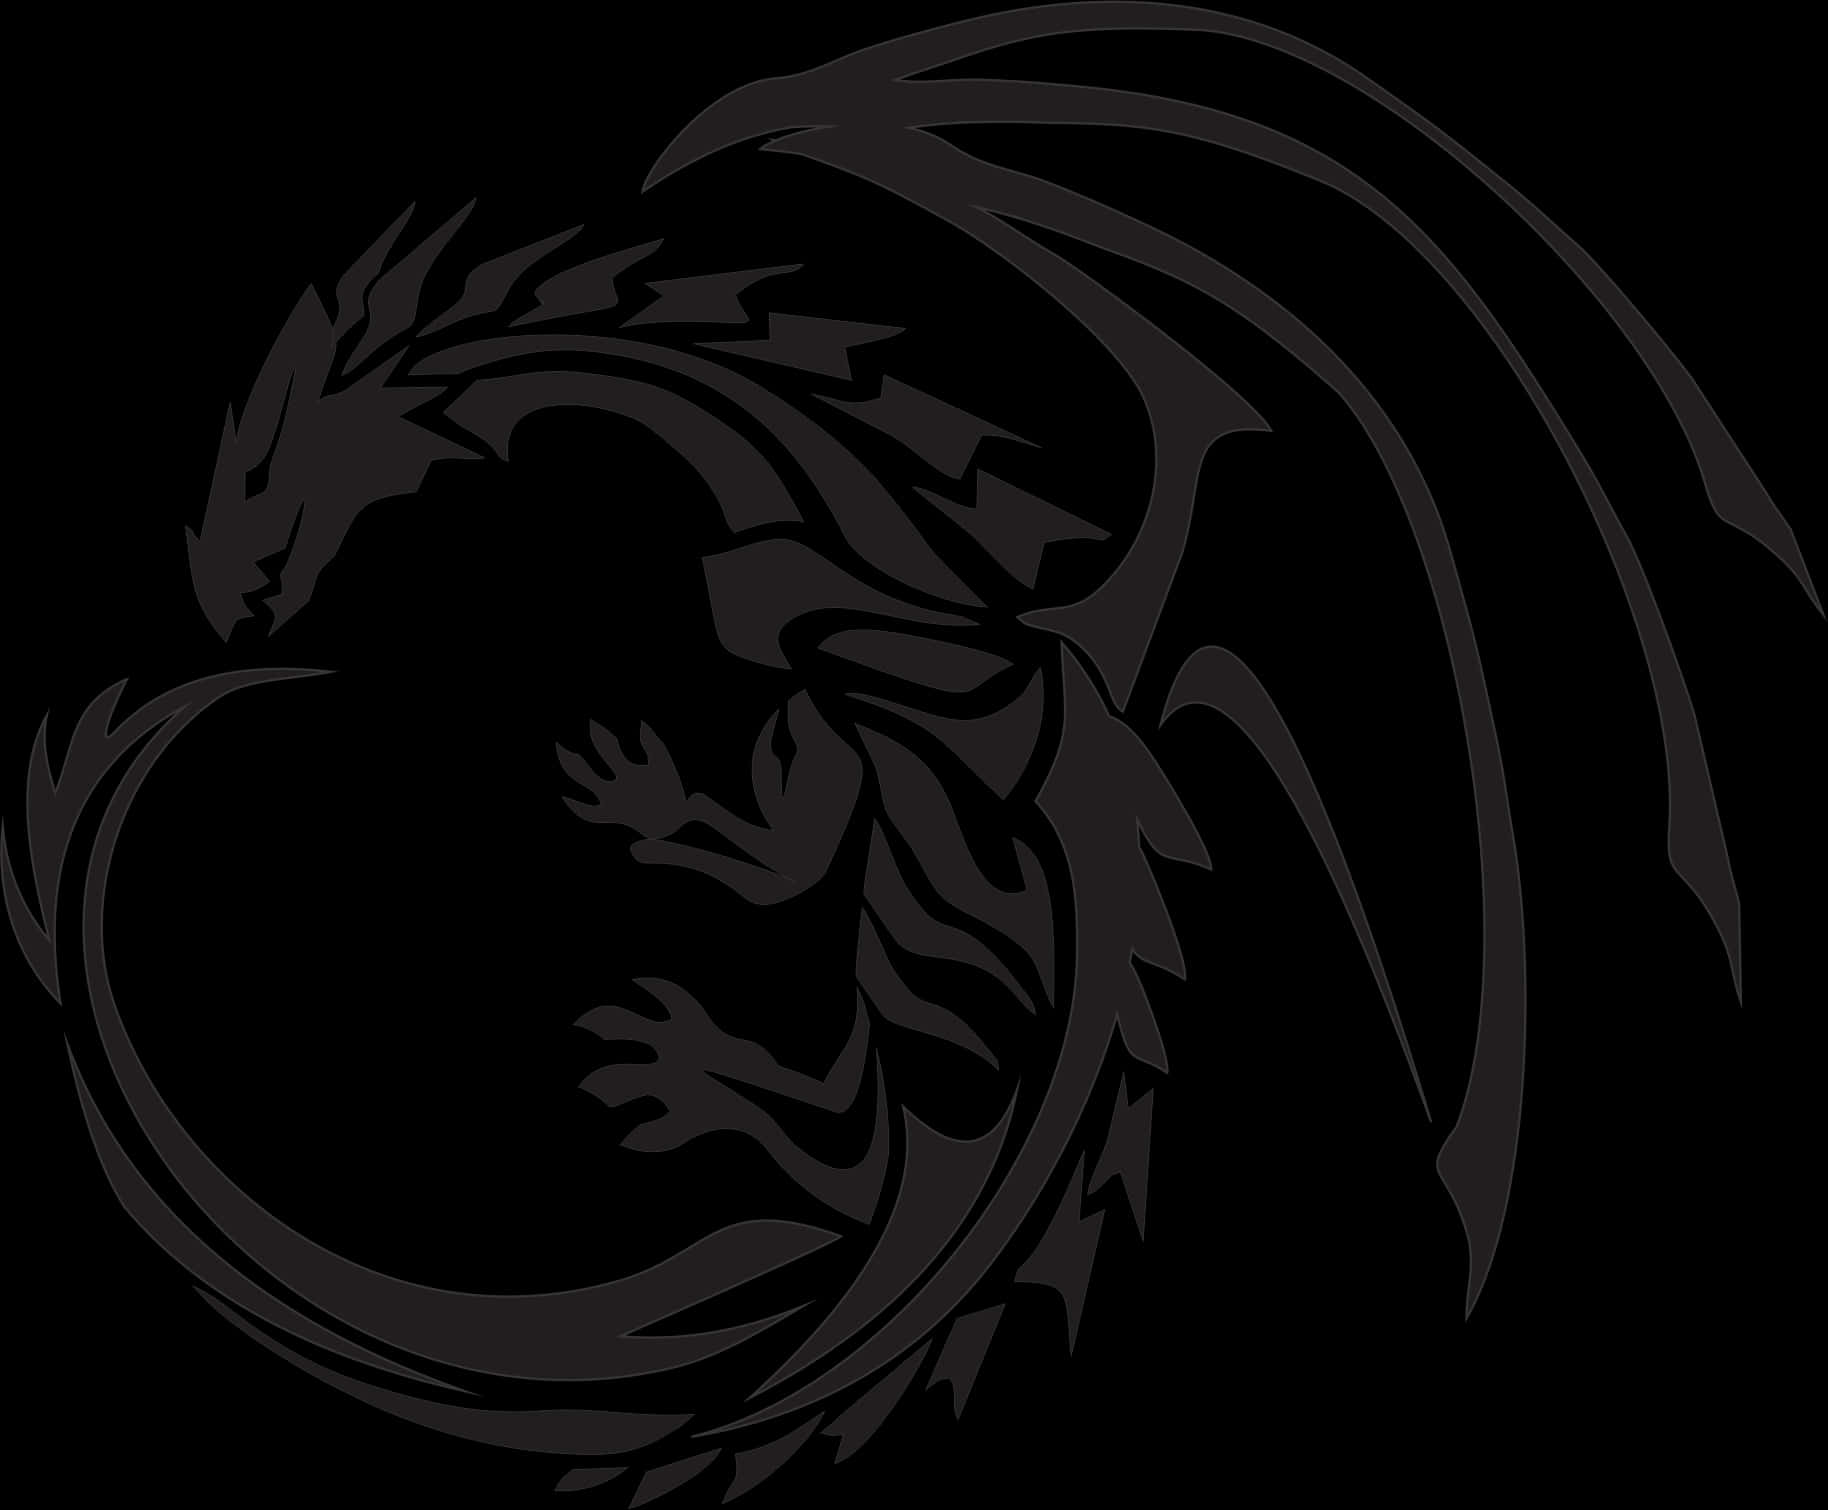 Abstract Black Dragon Silhouette PNG